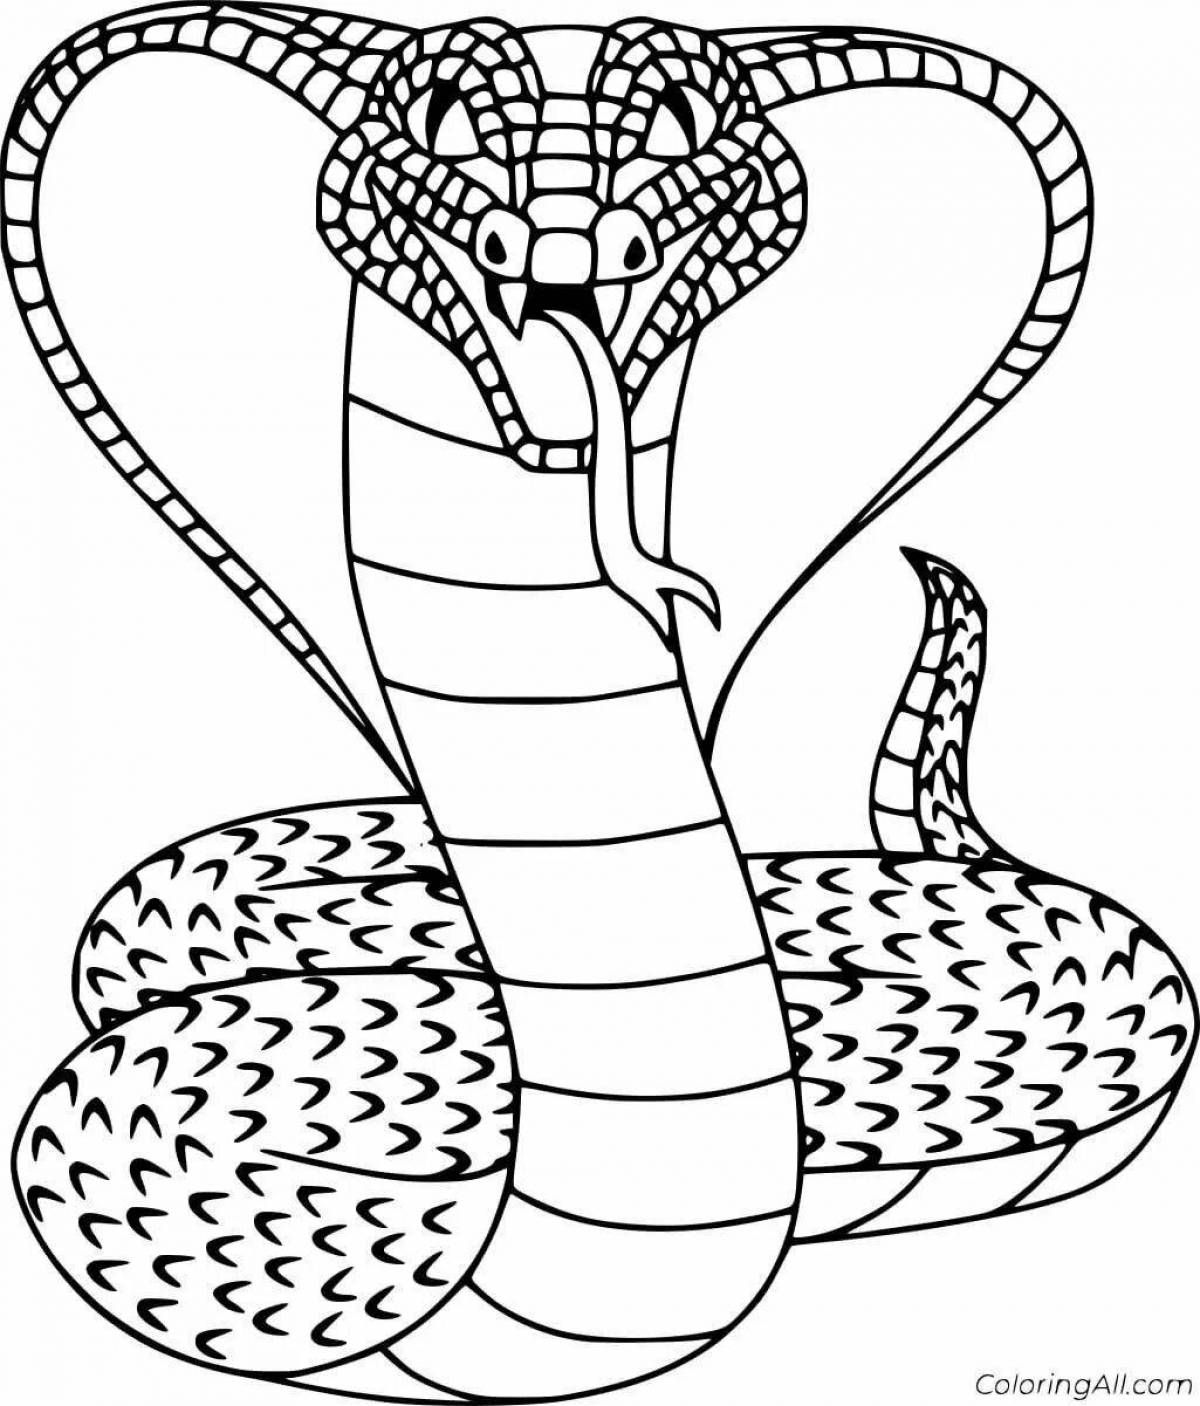 Vibrant snake coloring book for 5-6 year olds